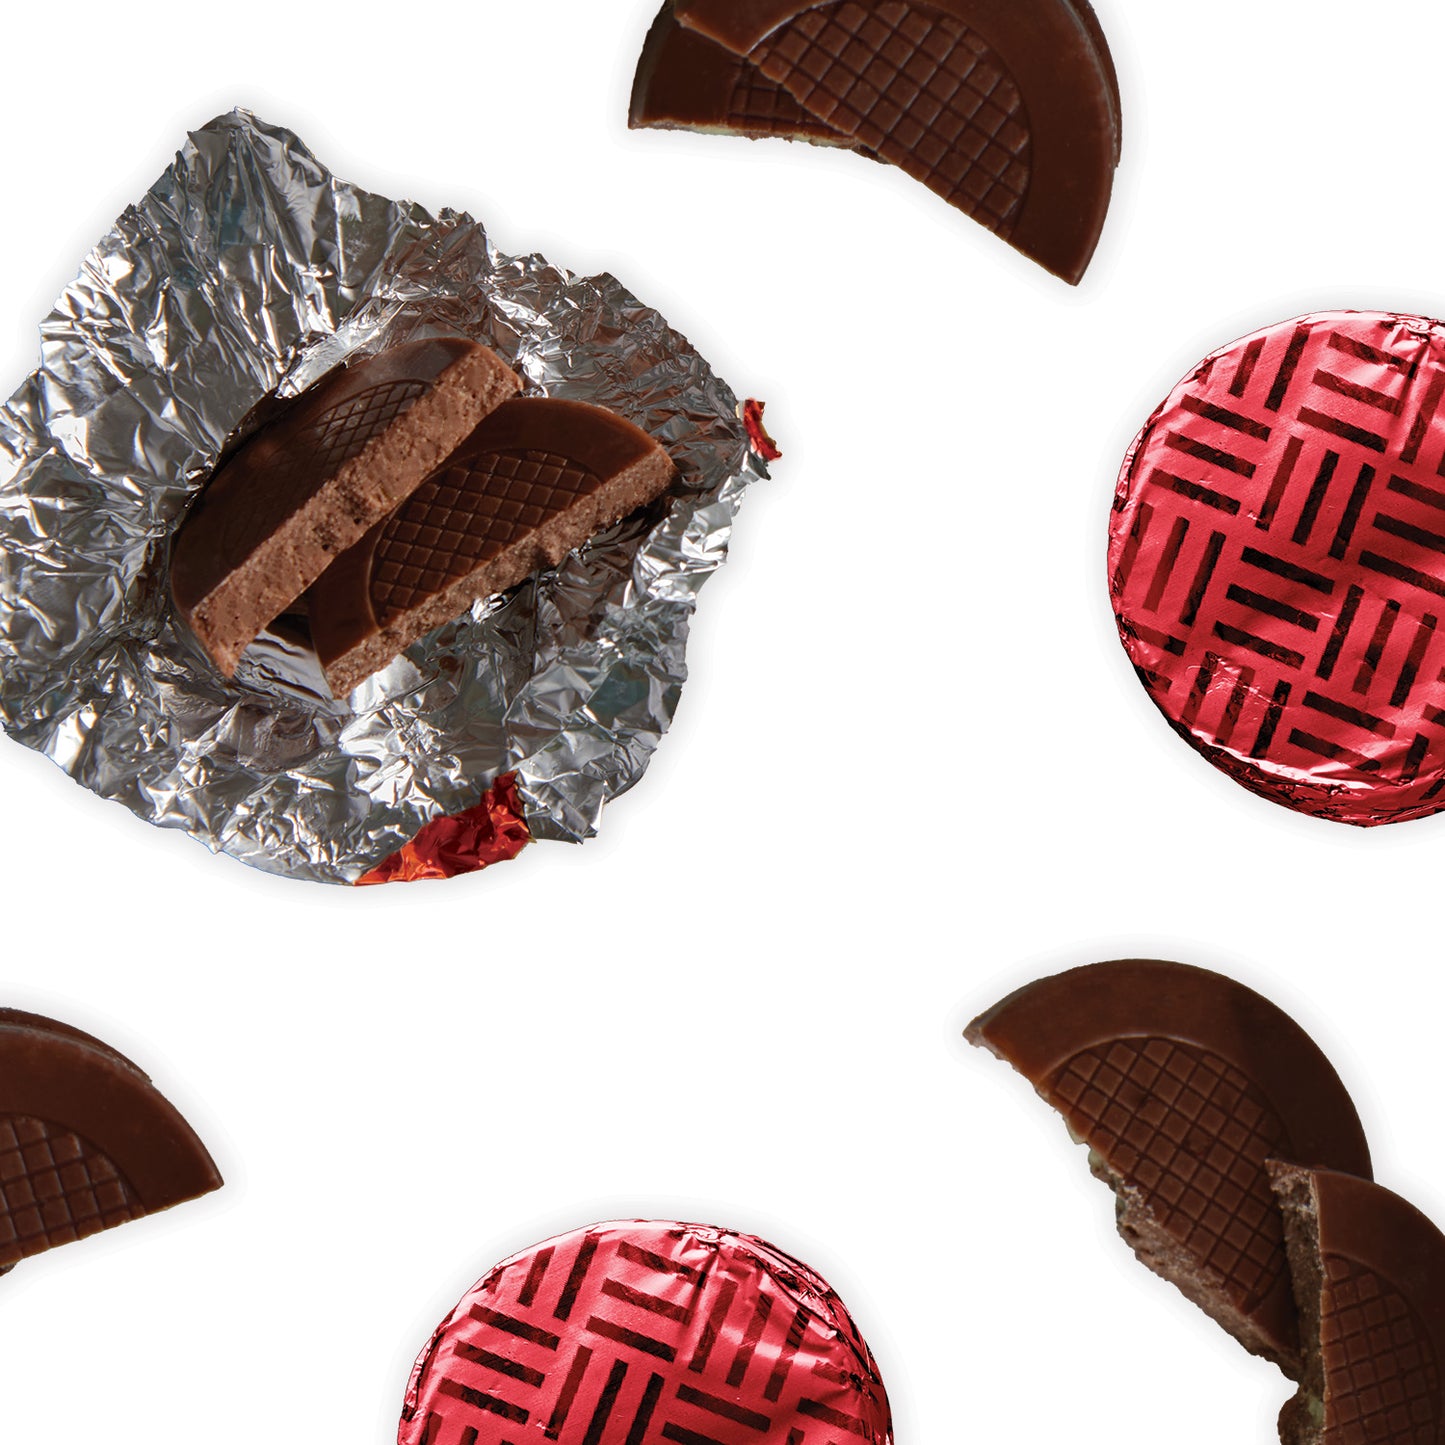 Dark chocolate discs individually wrapped in red foil